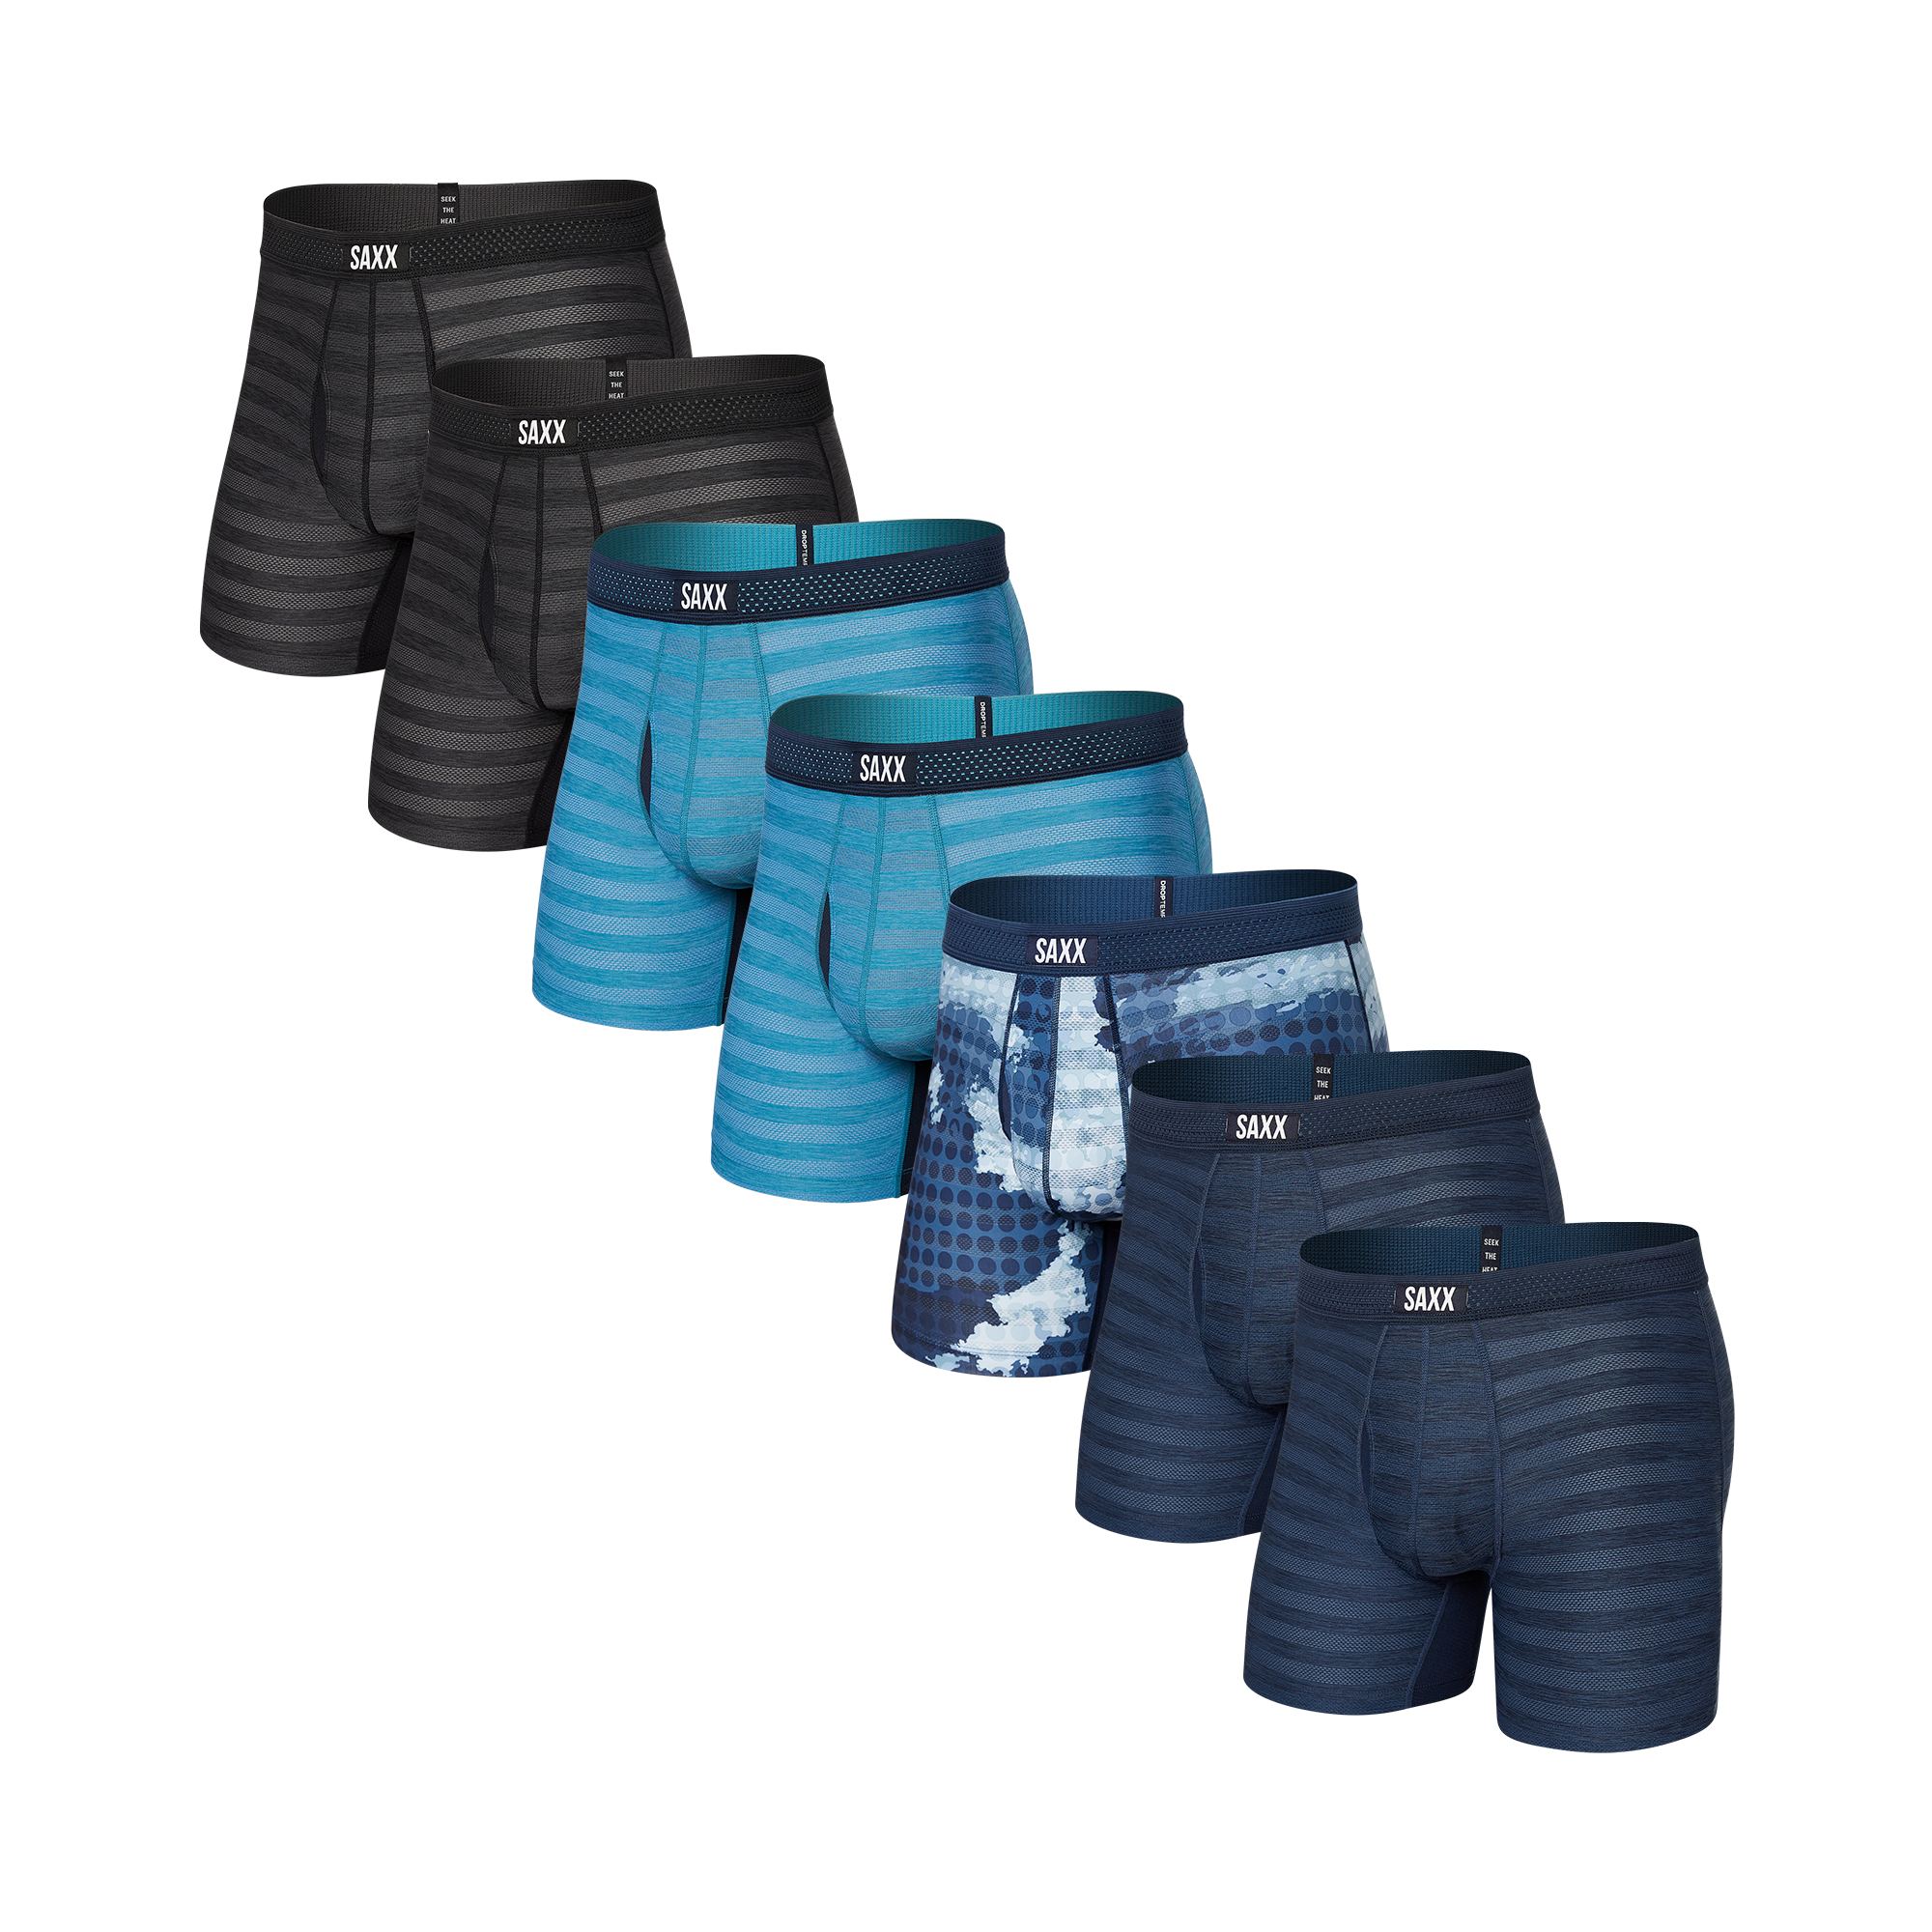 DropTemp Cooling Mesh Boxer Brief 7-Pack in Assorted Prints